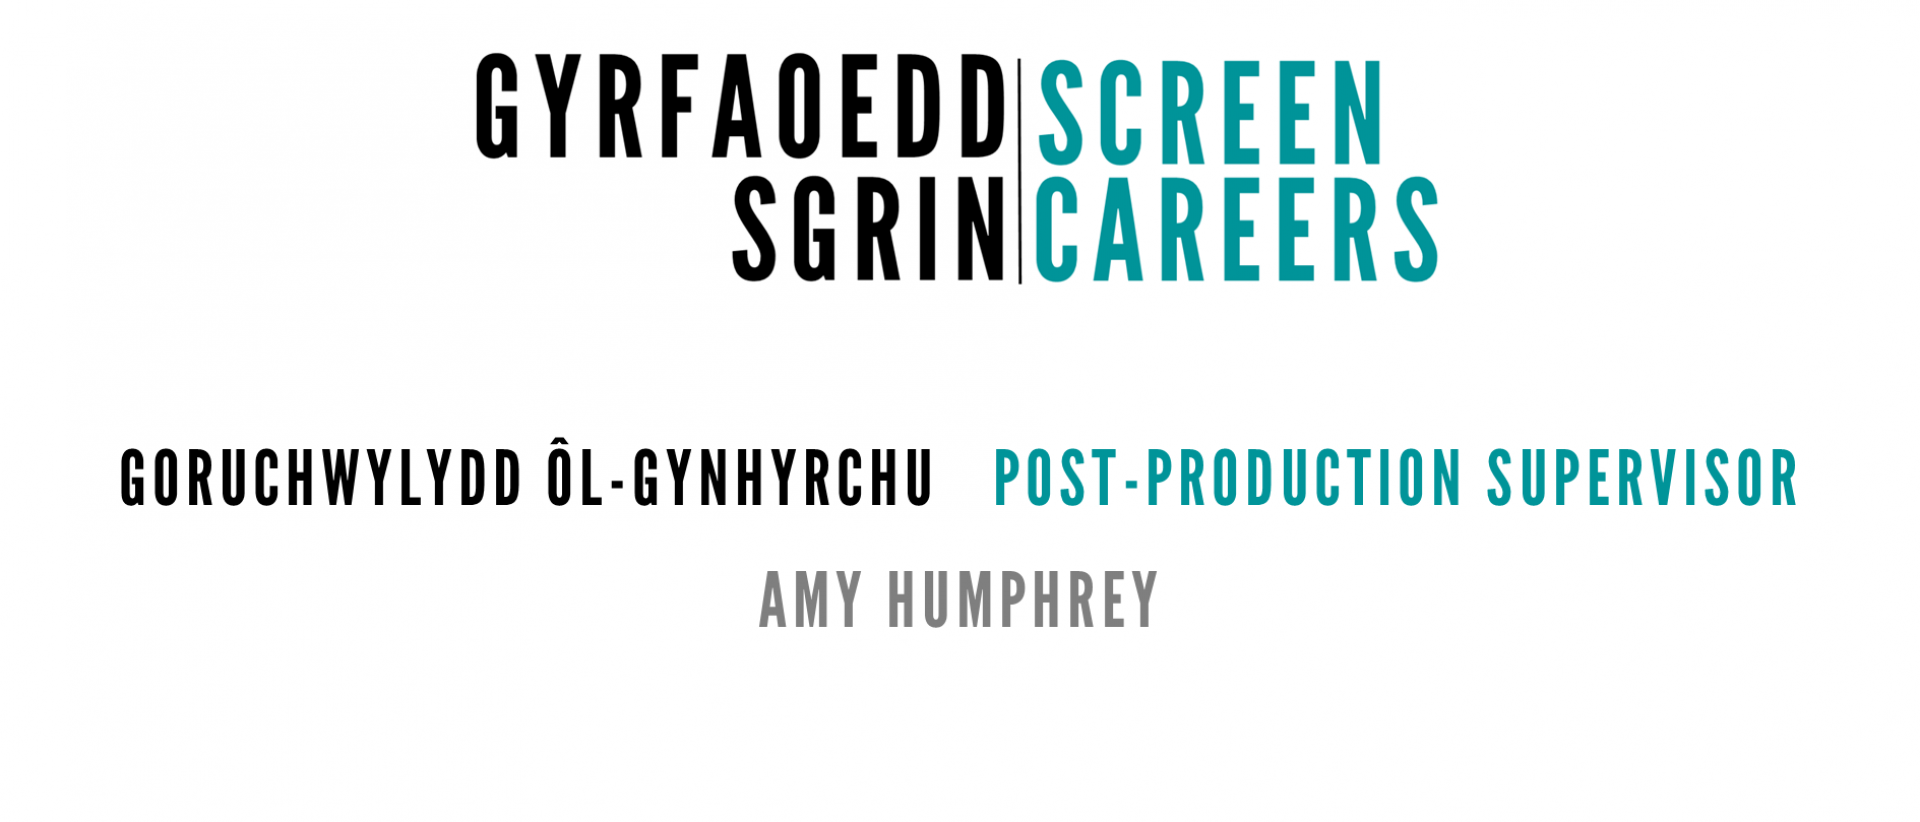 screen careers logo and post-production supervisor